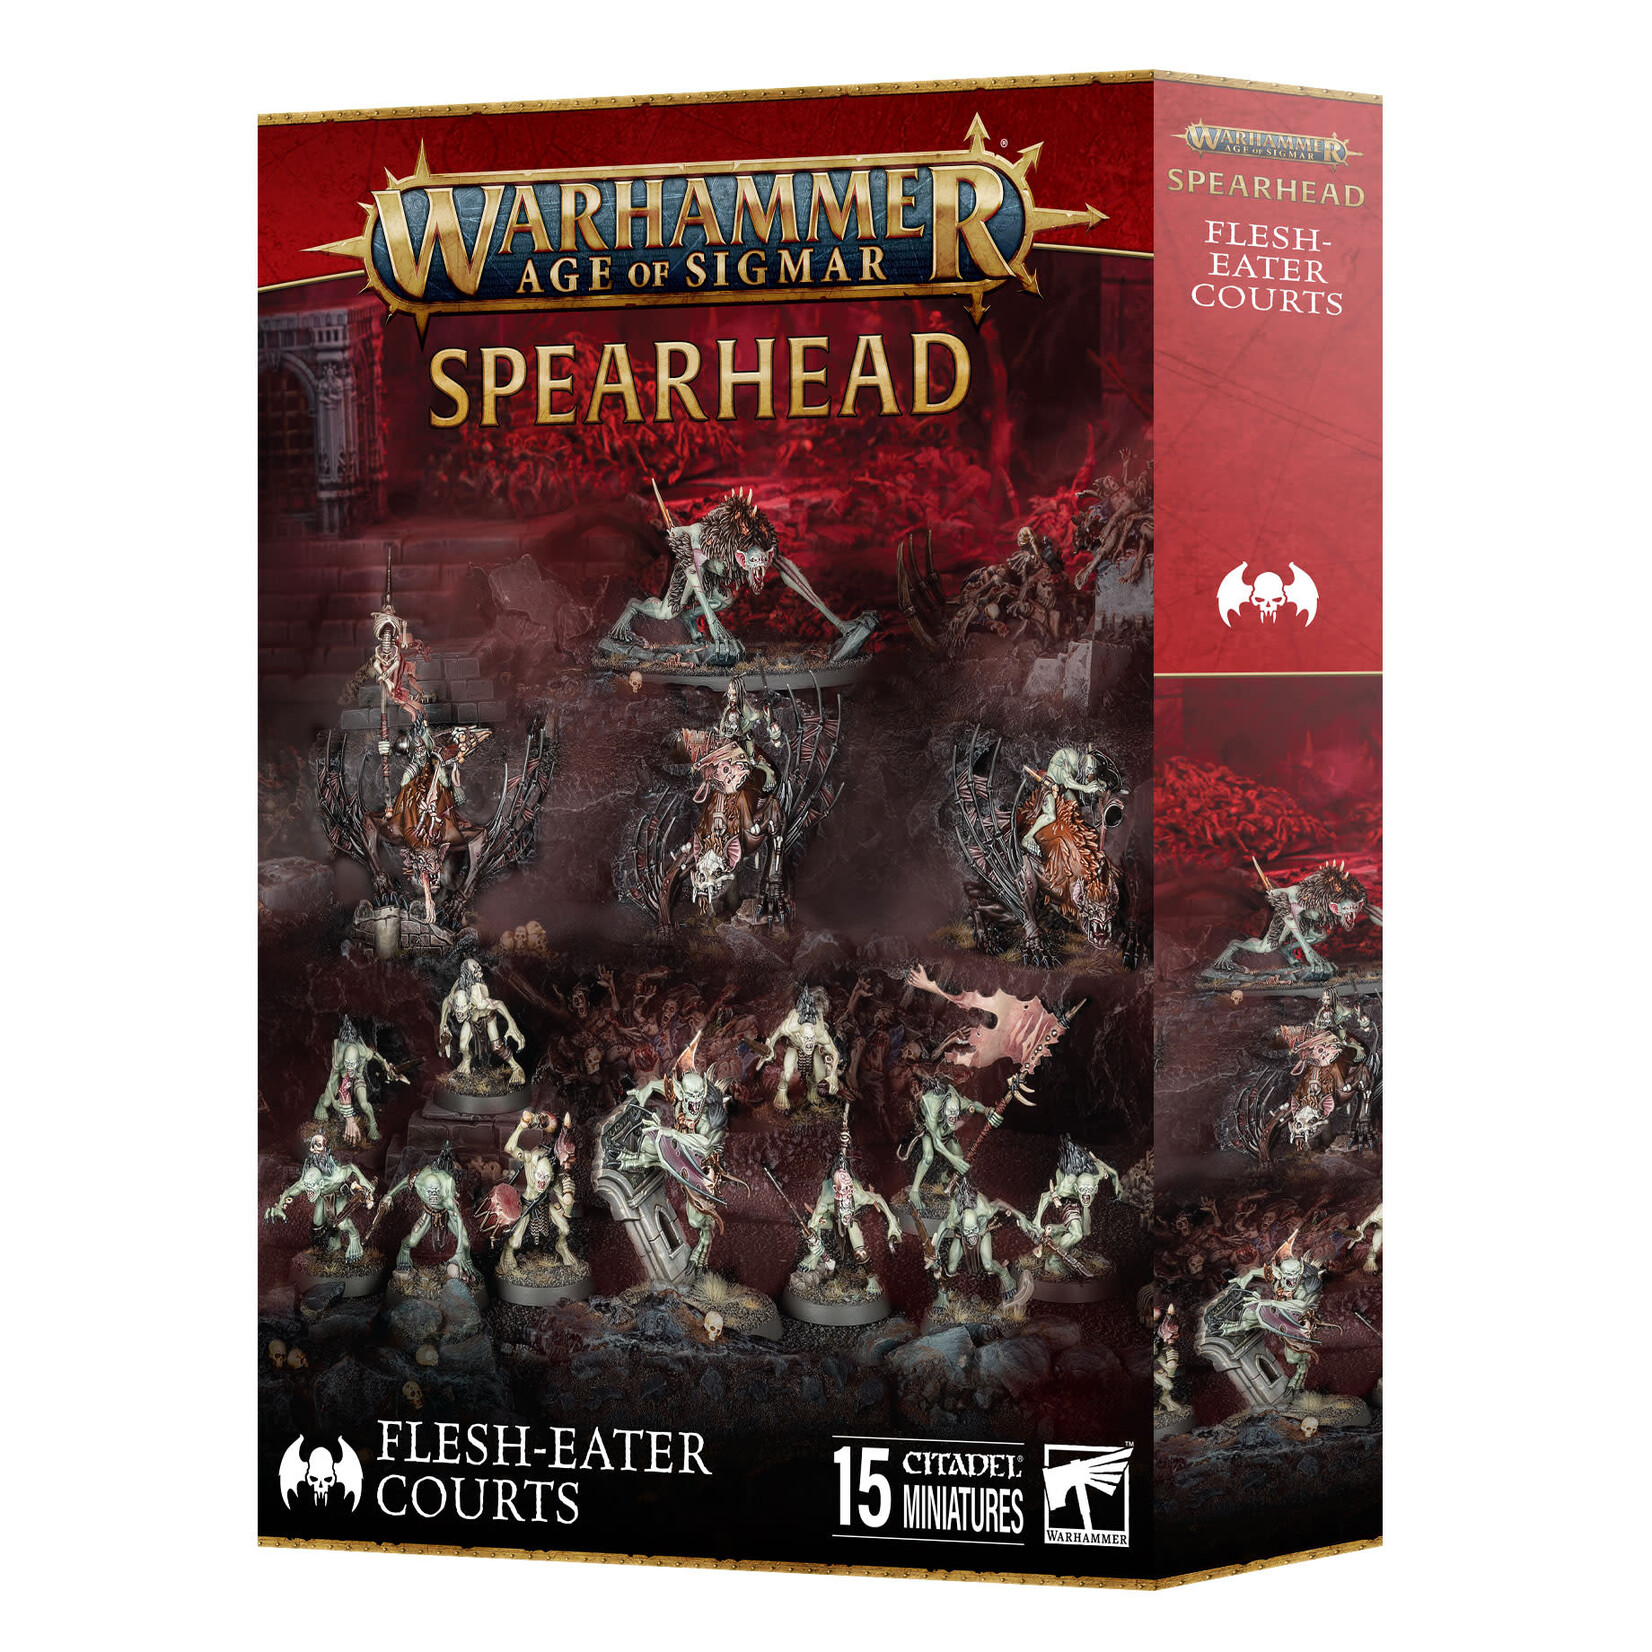 Games Workshop Warhammer Age of Sigmar Spearhead Flesh-Eater Courts